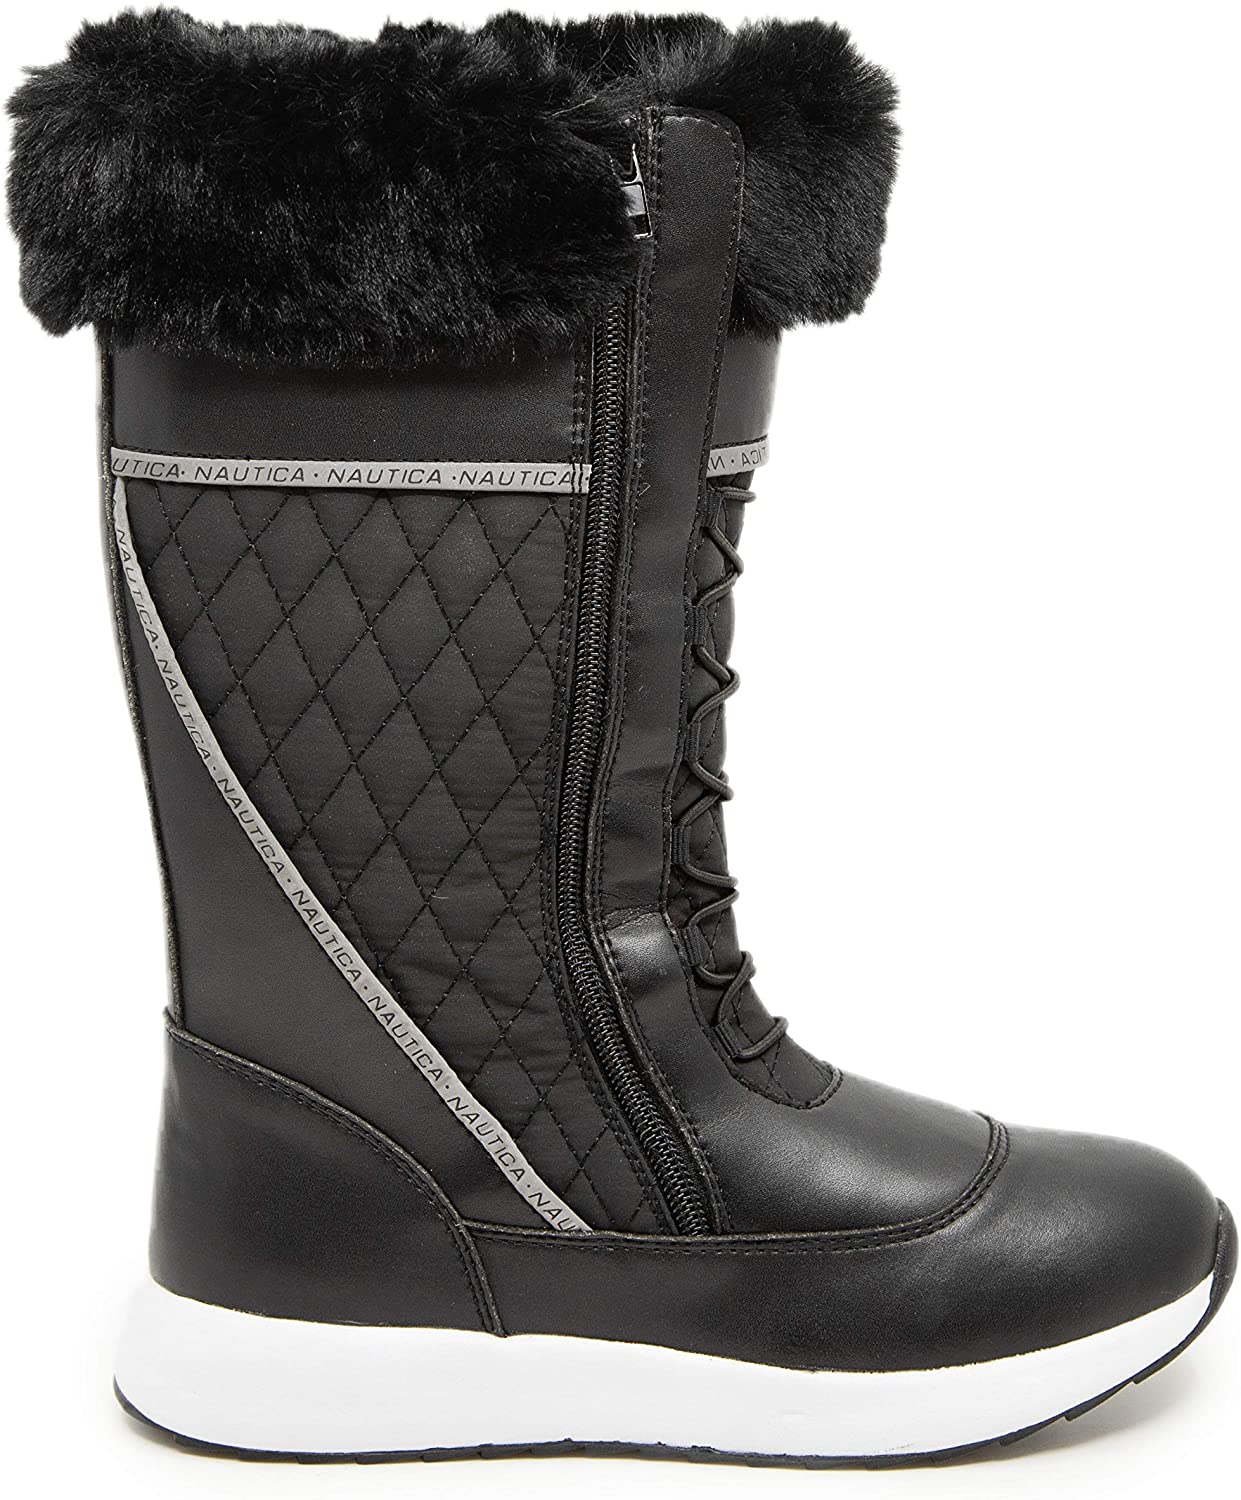 Nautica Women's Everly Cold Weather Snow Boot with Sherpa Fur, Black ...